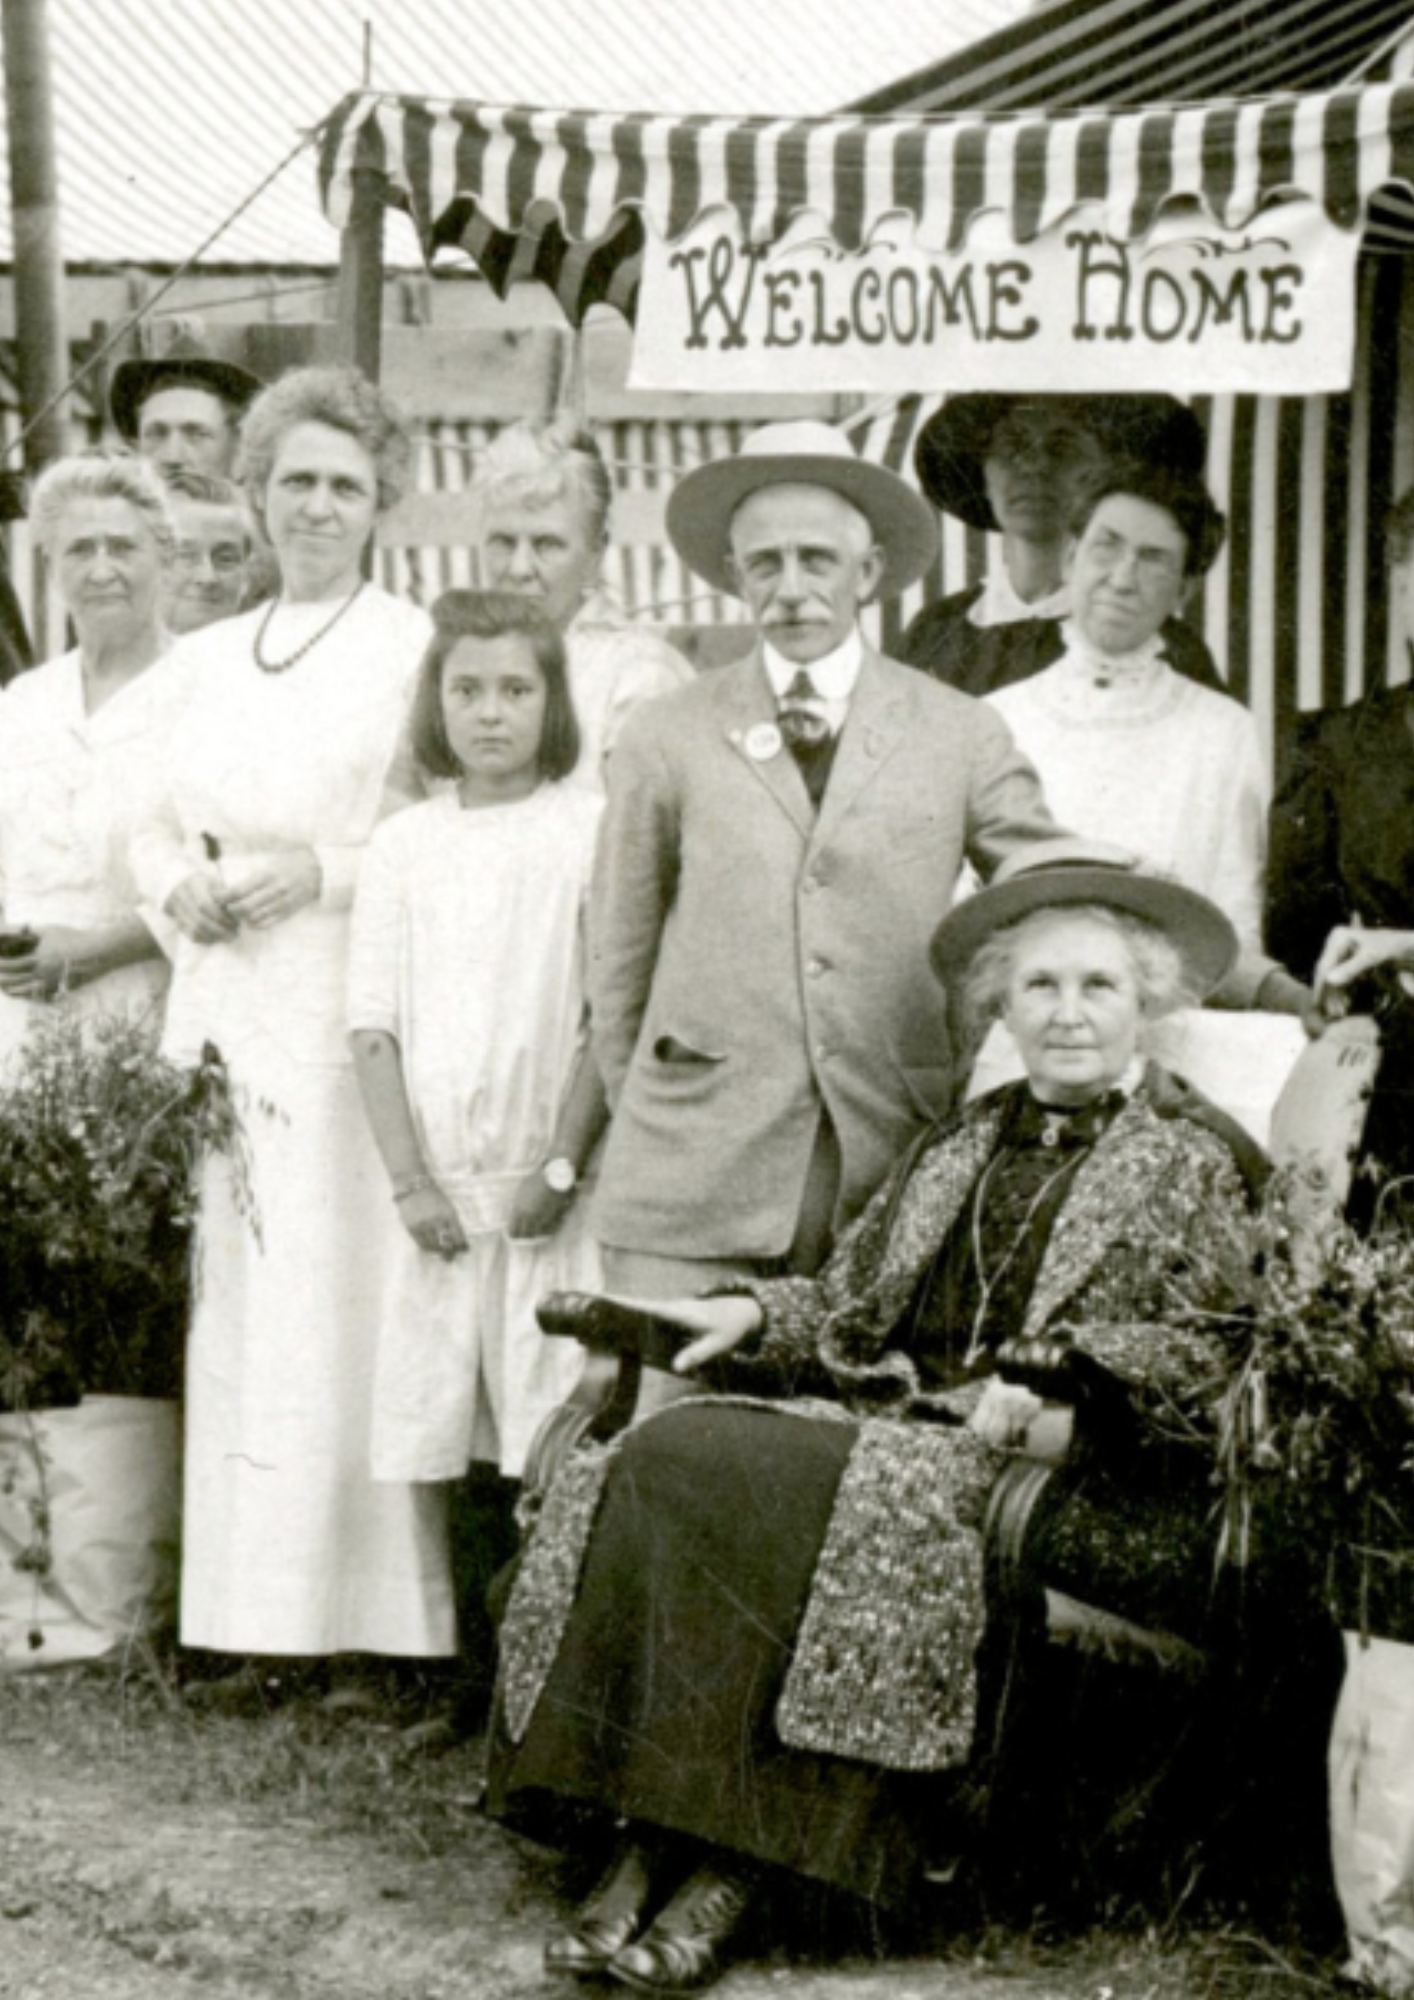 Historic photo of people at Tent City with a "Welcome Home" sign.